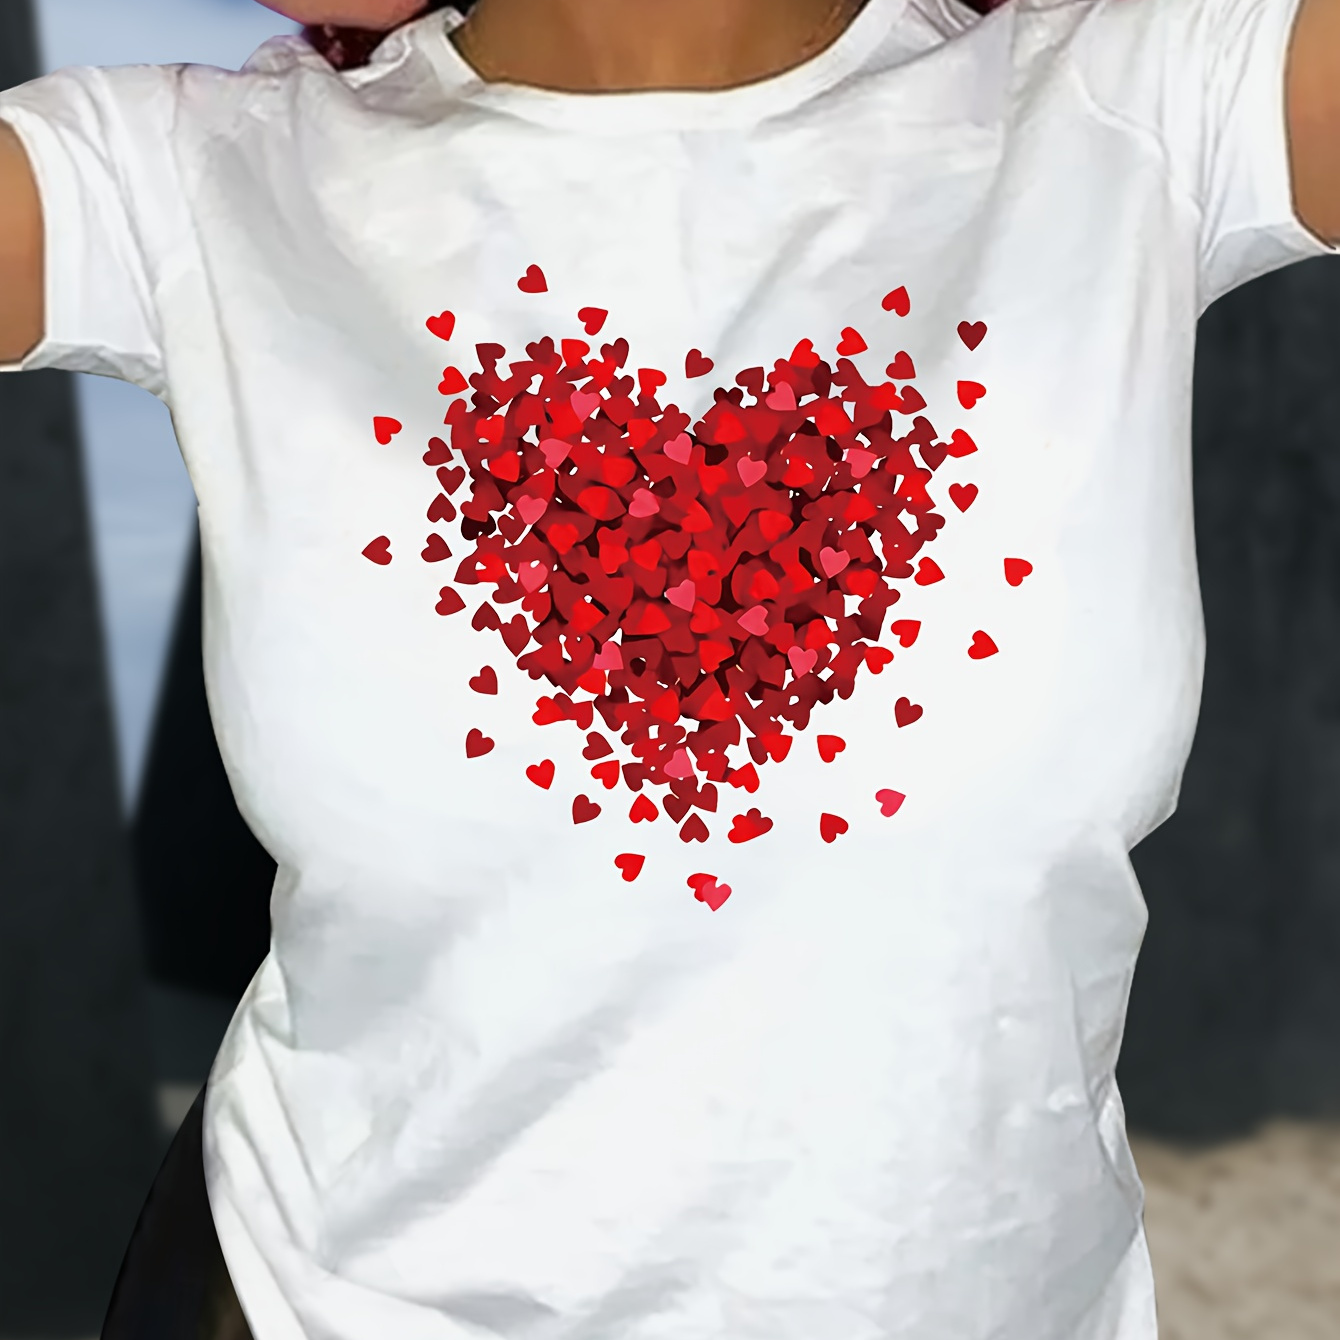 

Heart Graphic Print T-shirt, Short Sleeve Crew Neck Casual Top For Summer & Spring, Women's Clothing